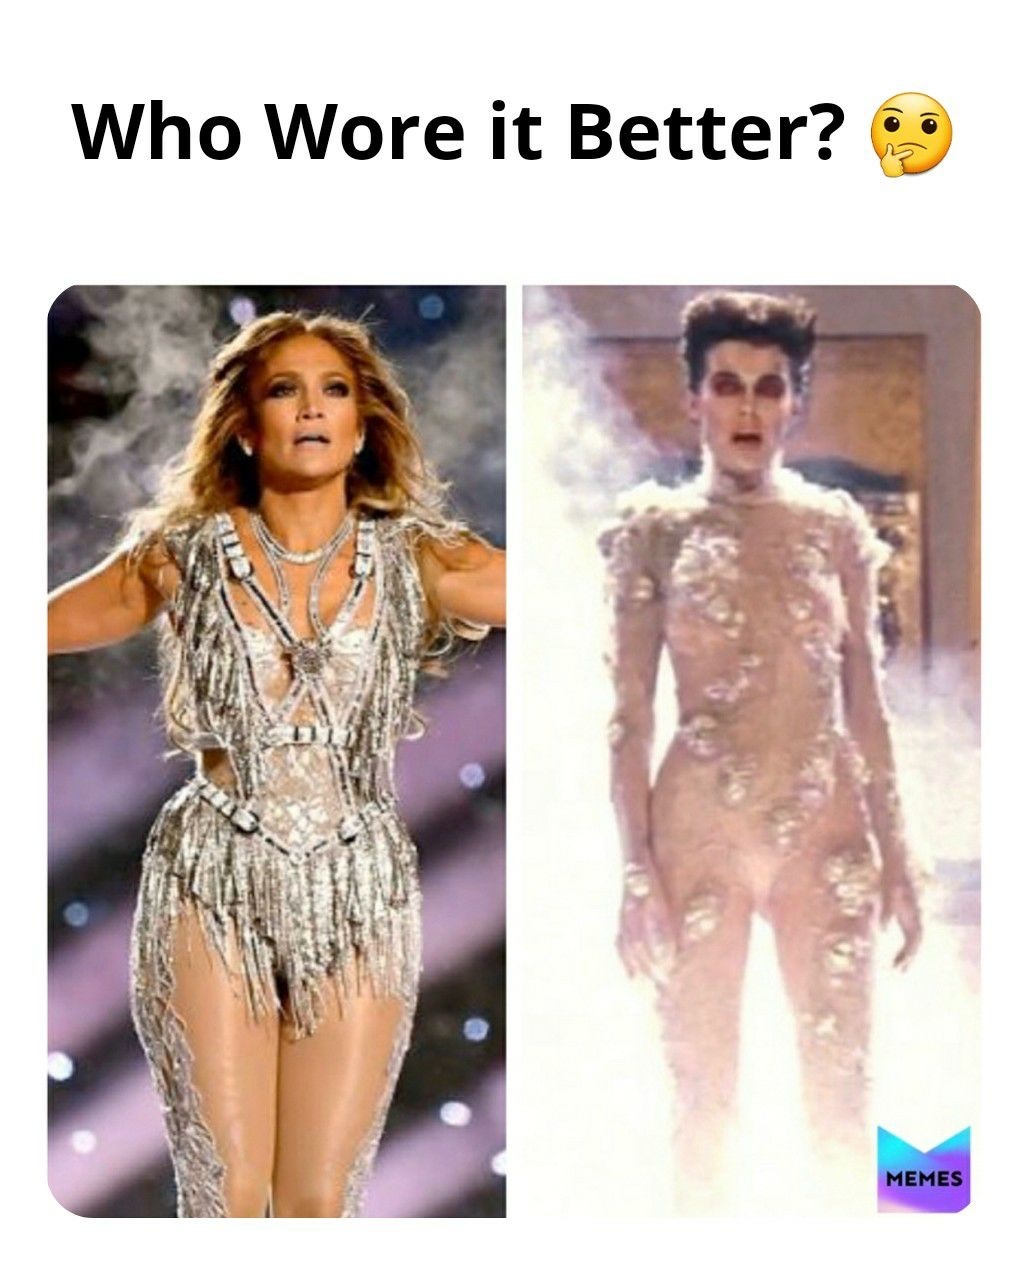 Well played, JLo - meme